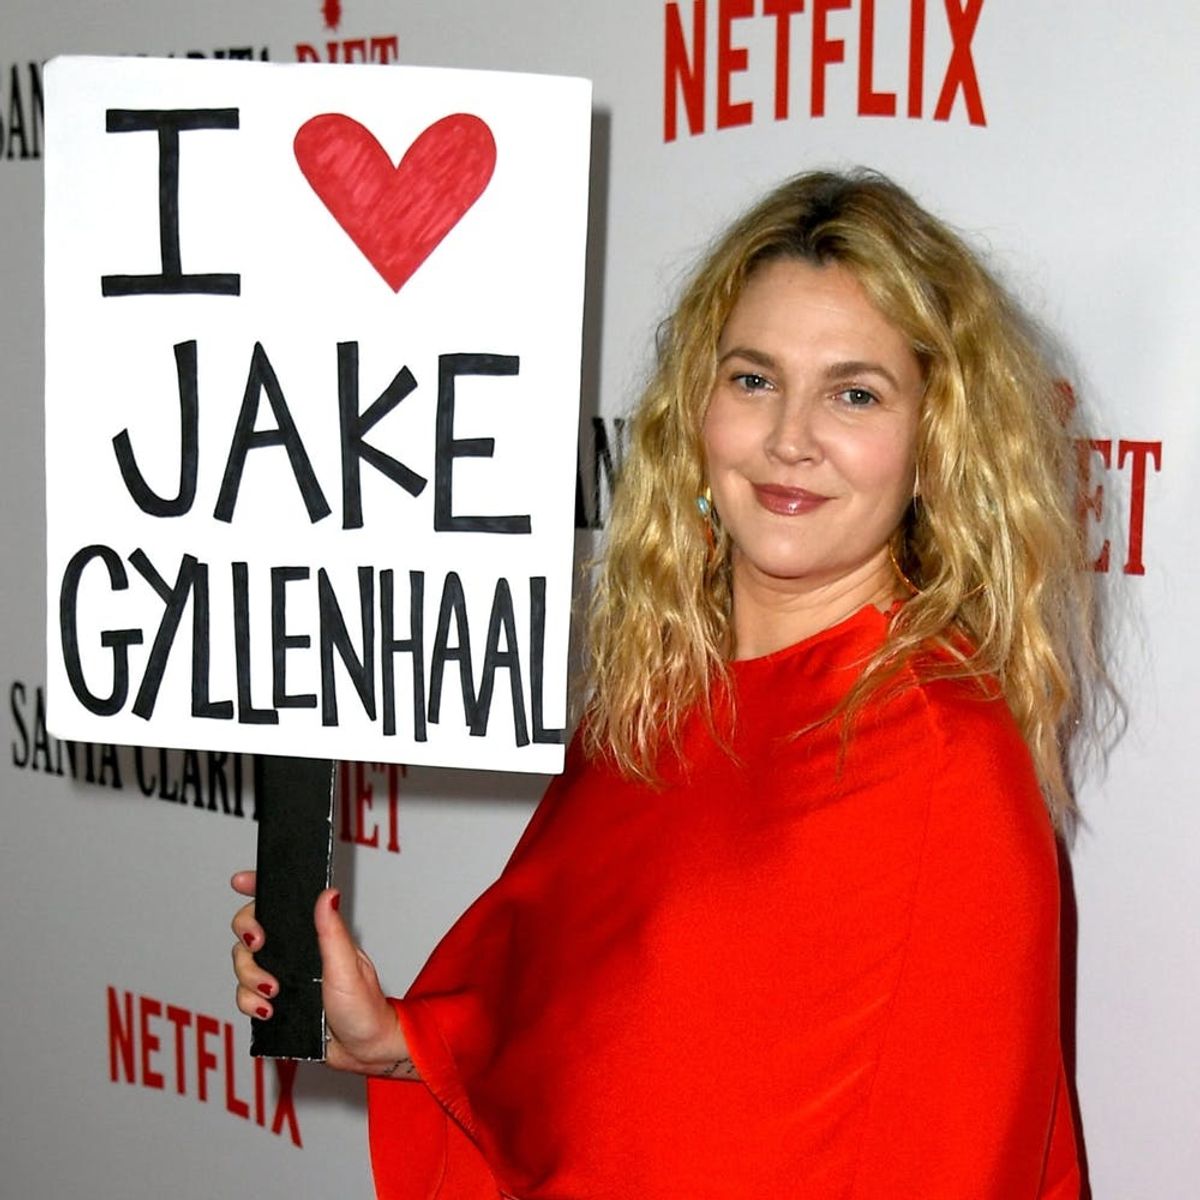 This Is Why Drew Barrymore Had an ‘I *Heart* Jake Gyllenhaal’ Sign on the Red Carpet